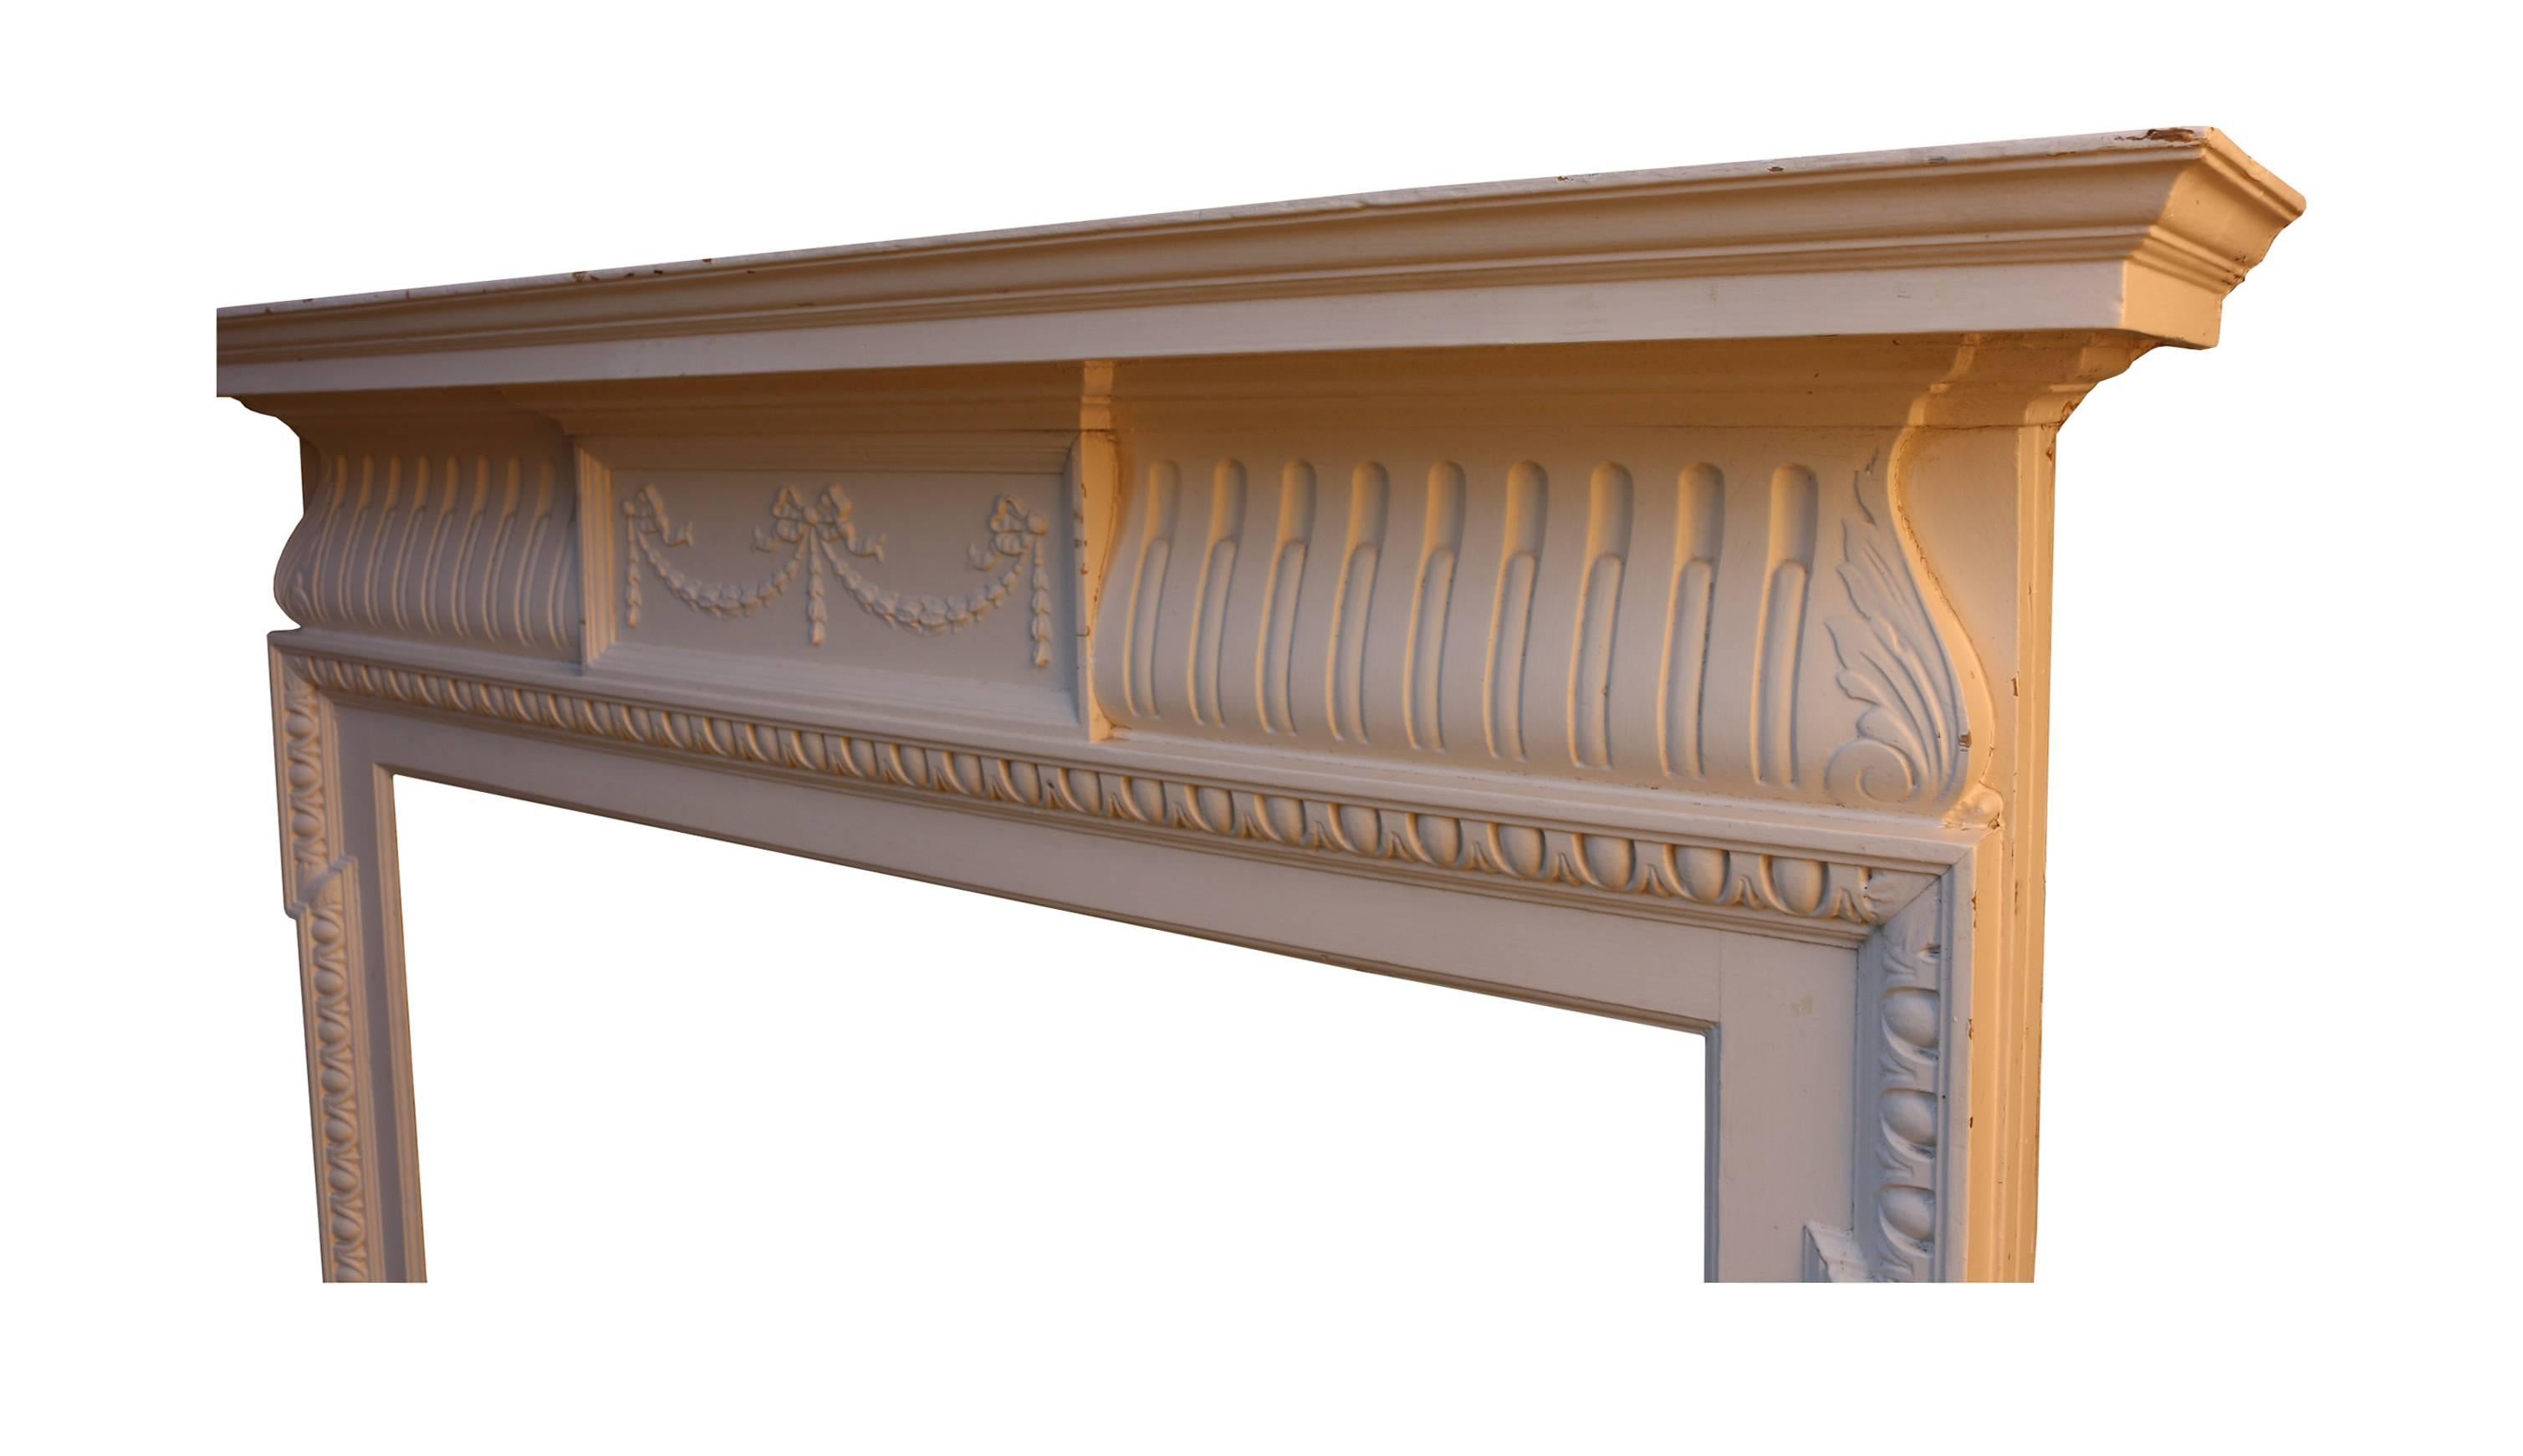 English Late 19th Century Painted Pine and Composition Fire Surround